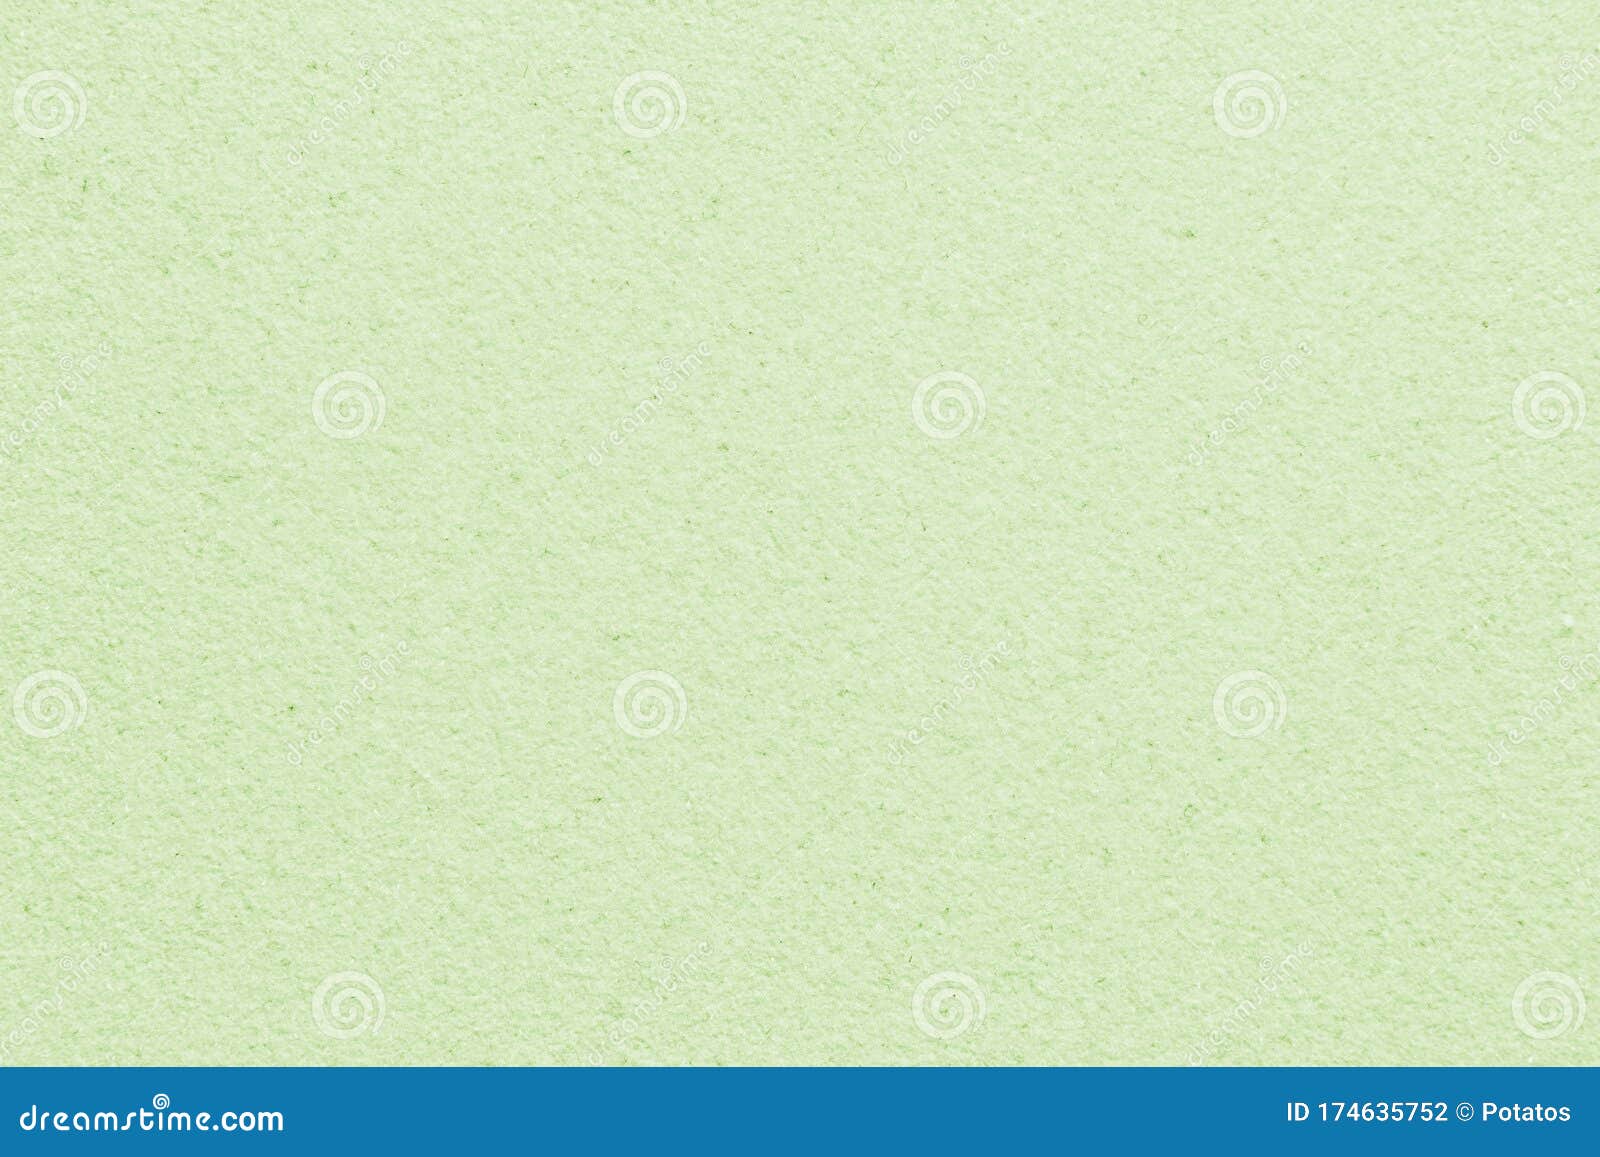 Pastel Green Velour Paper Texture Background. Blank Sheet of Suede ...